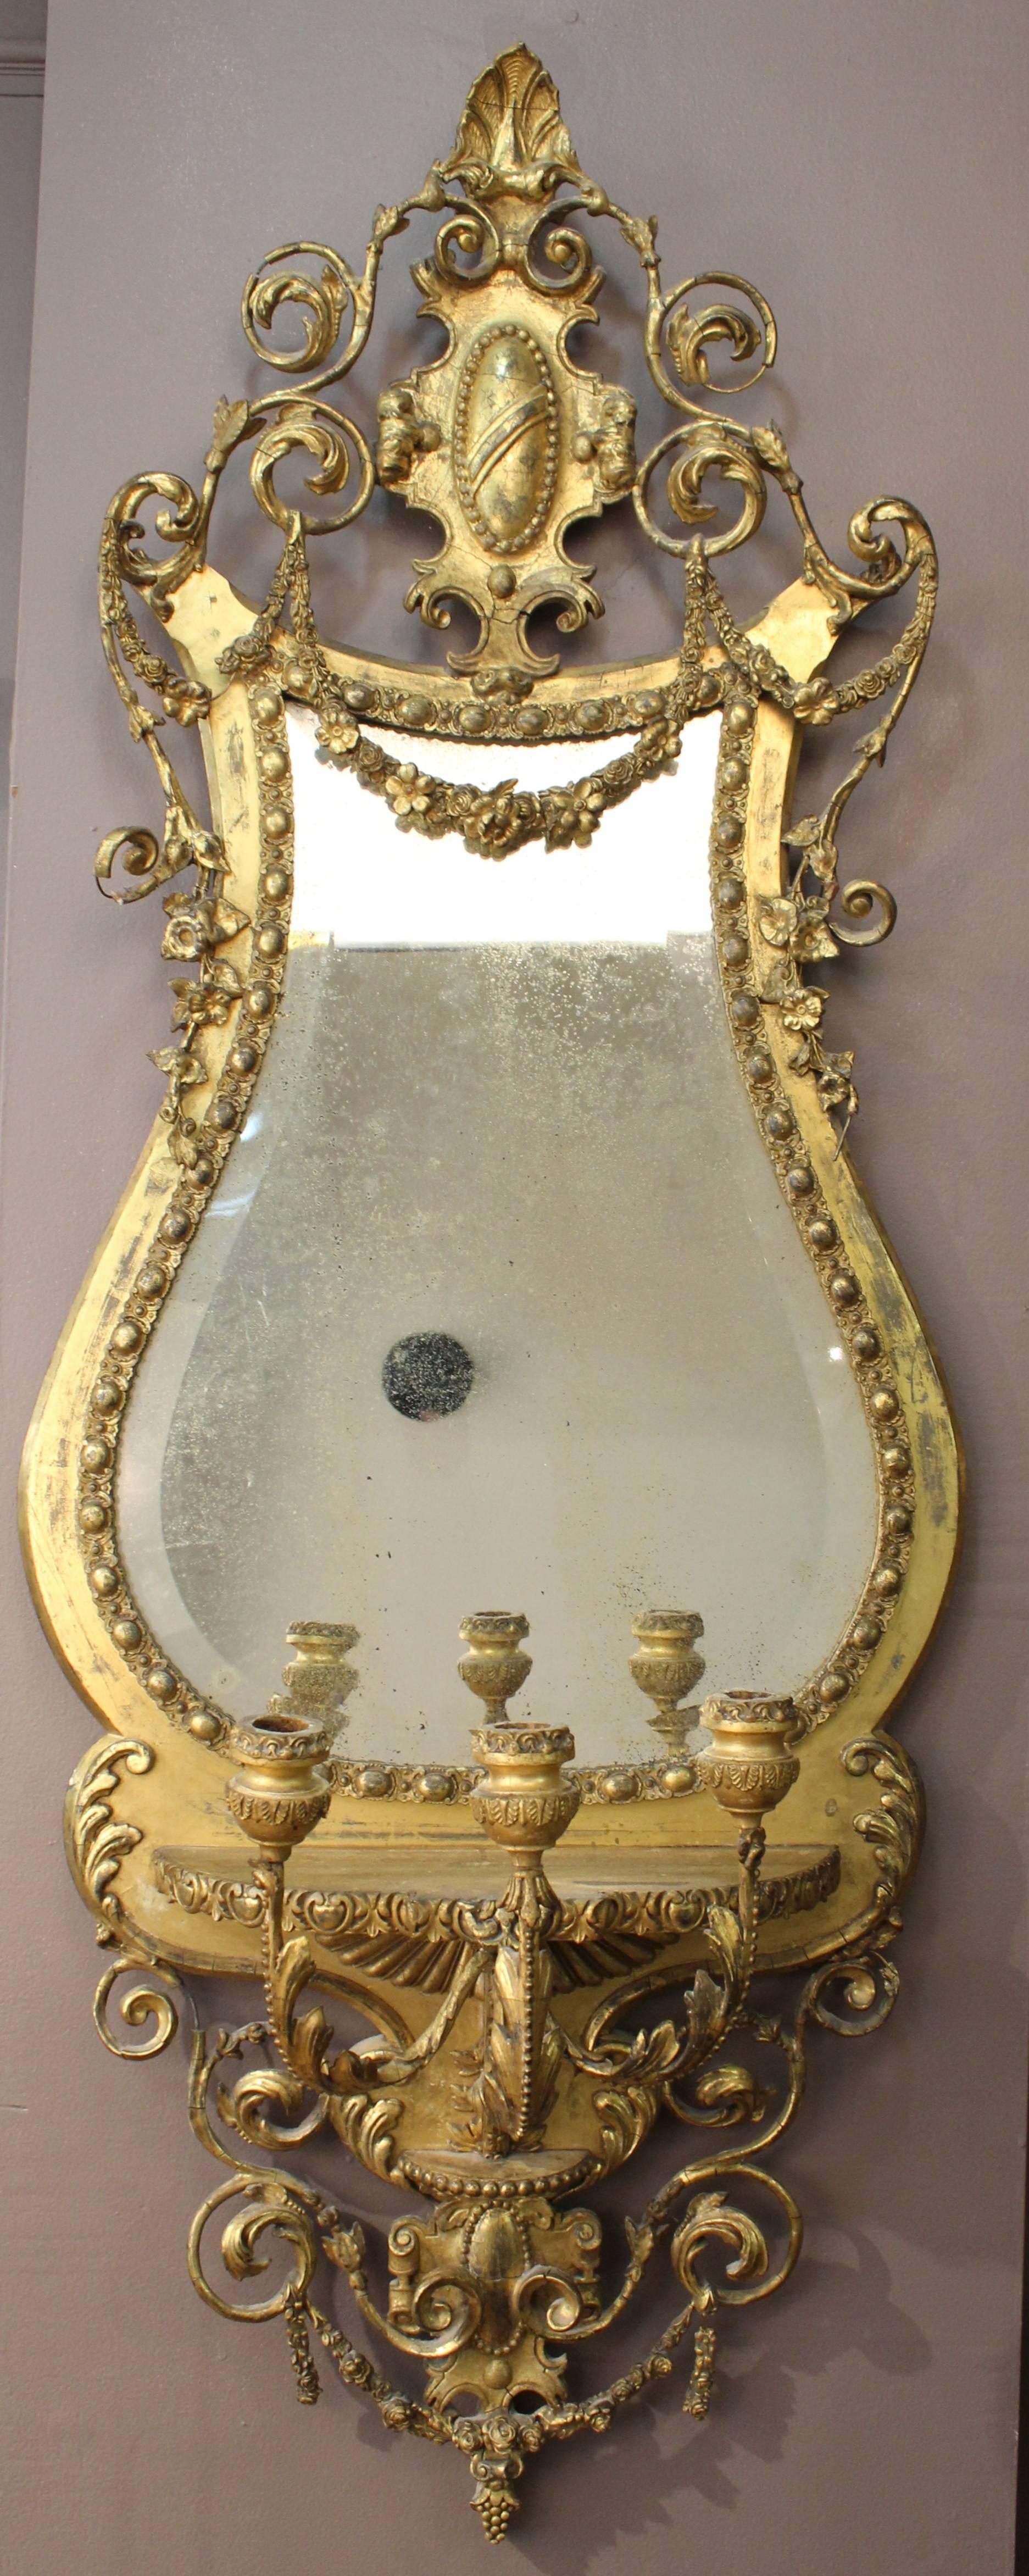 George III period wall mirror in gesso and giltwood. The mirror features ornately carved foliage and a lyre-shaped frame with gilt swags encasing an antique mirror with original patina. The base section contains three candelabra as well as more